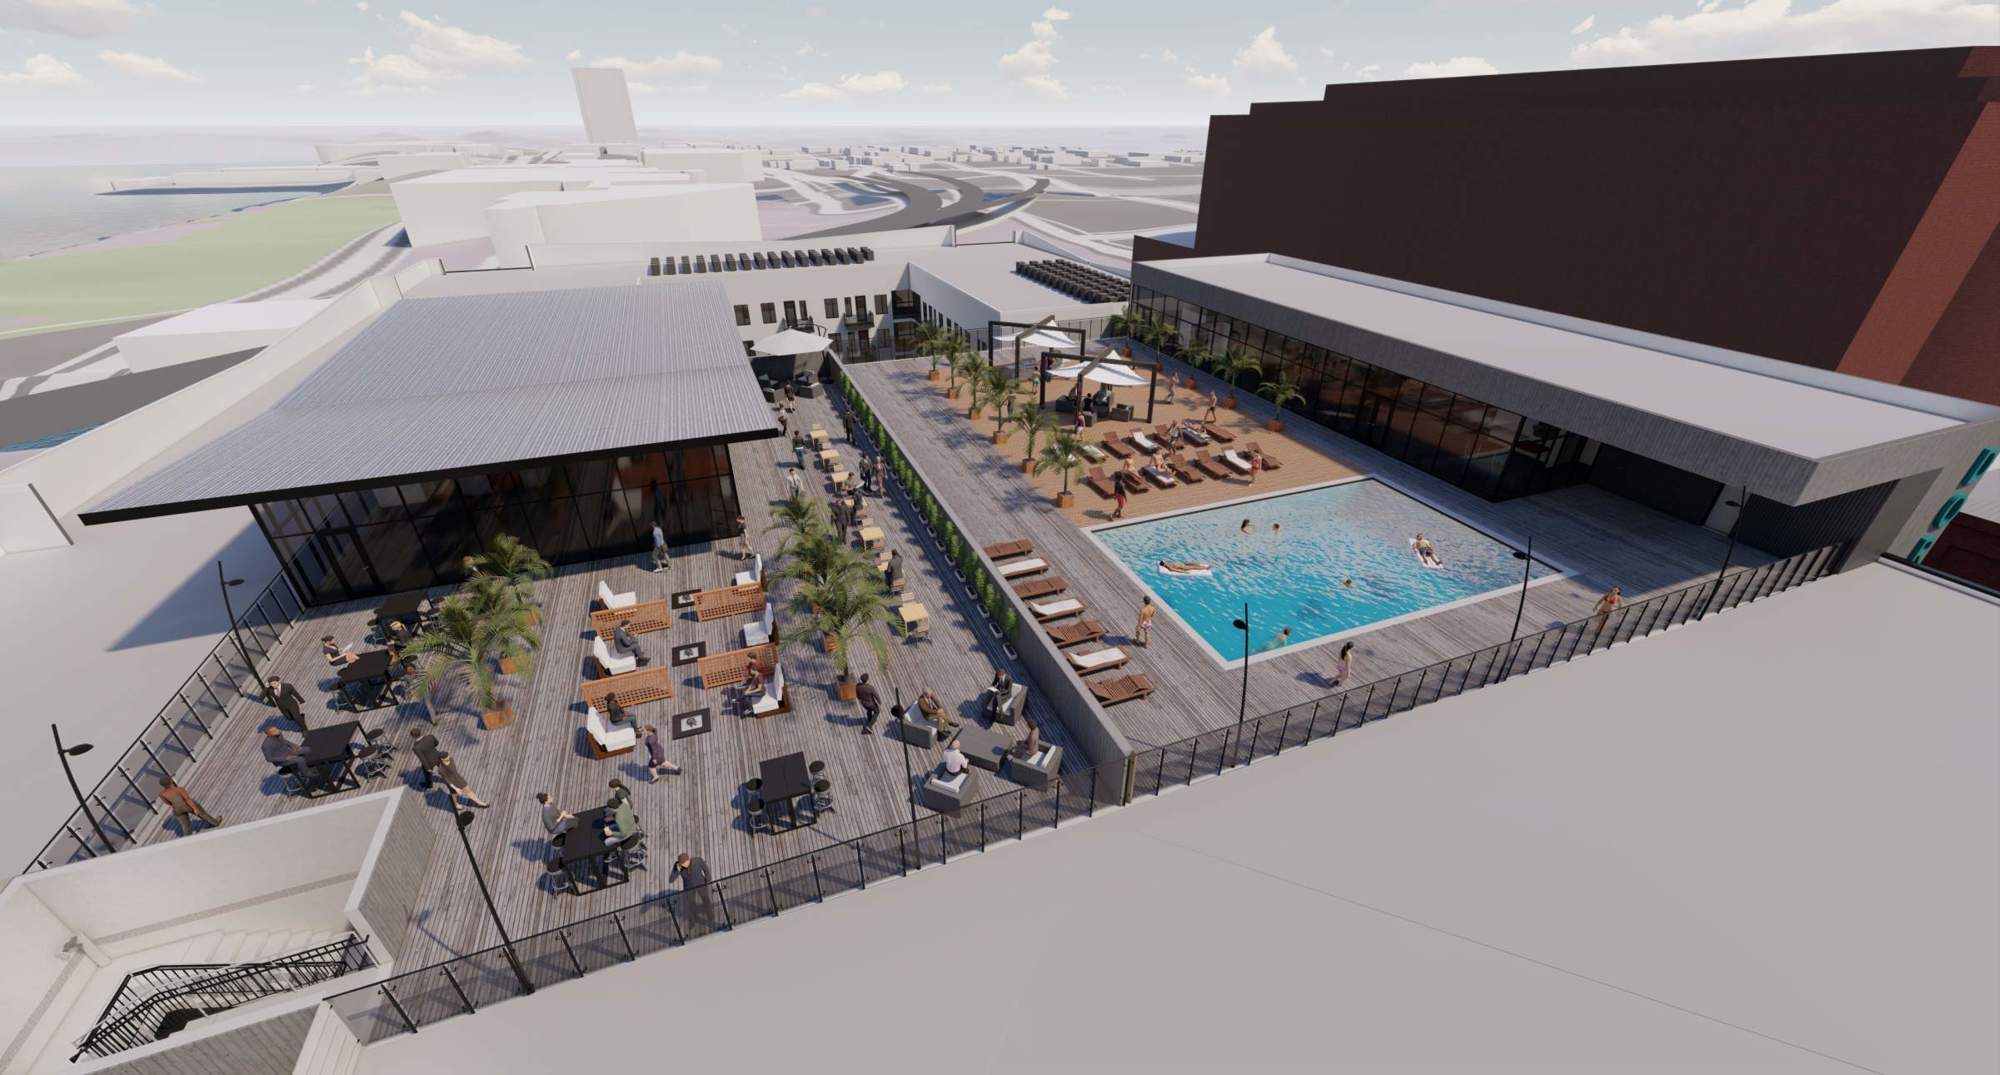 Plans for the Doro include a rooftop swimming pool.